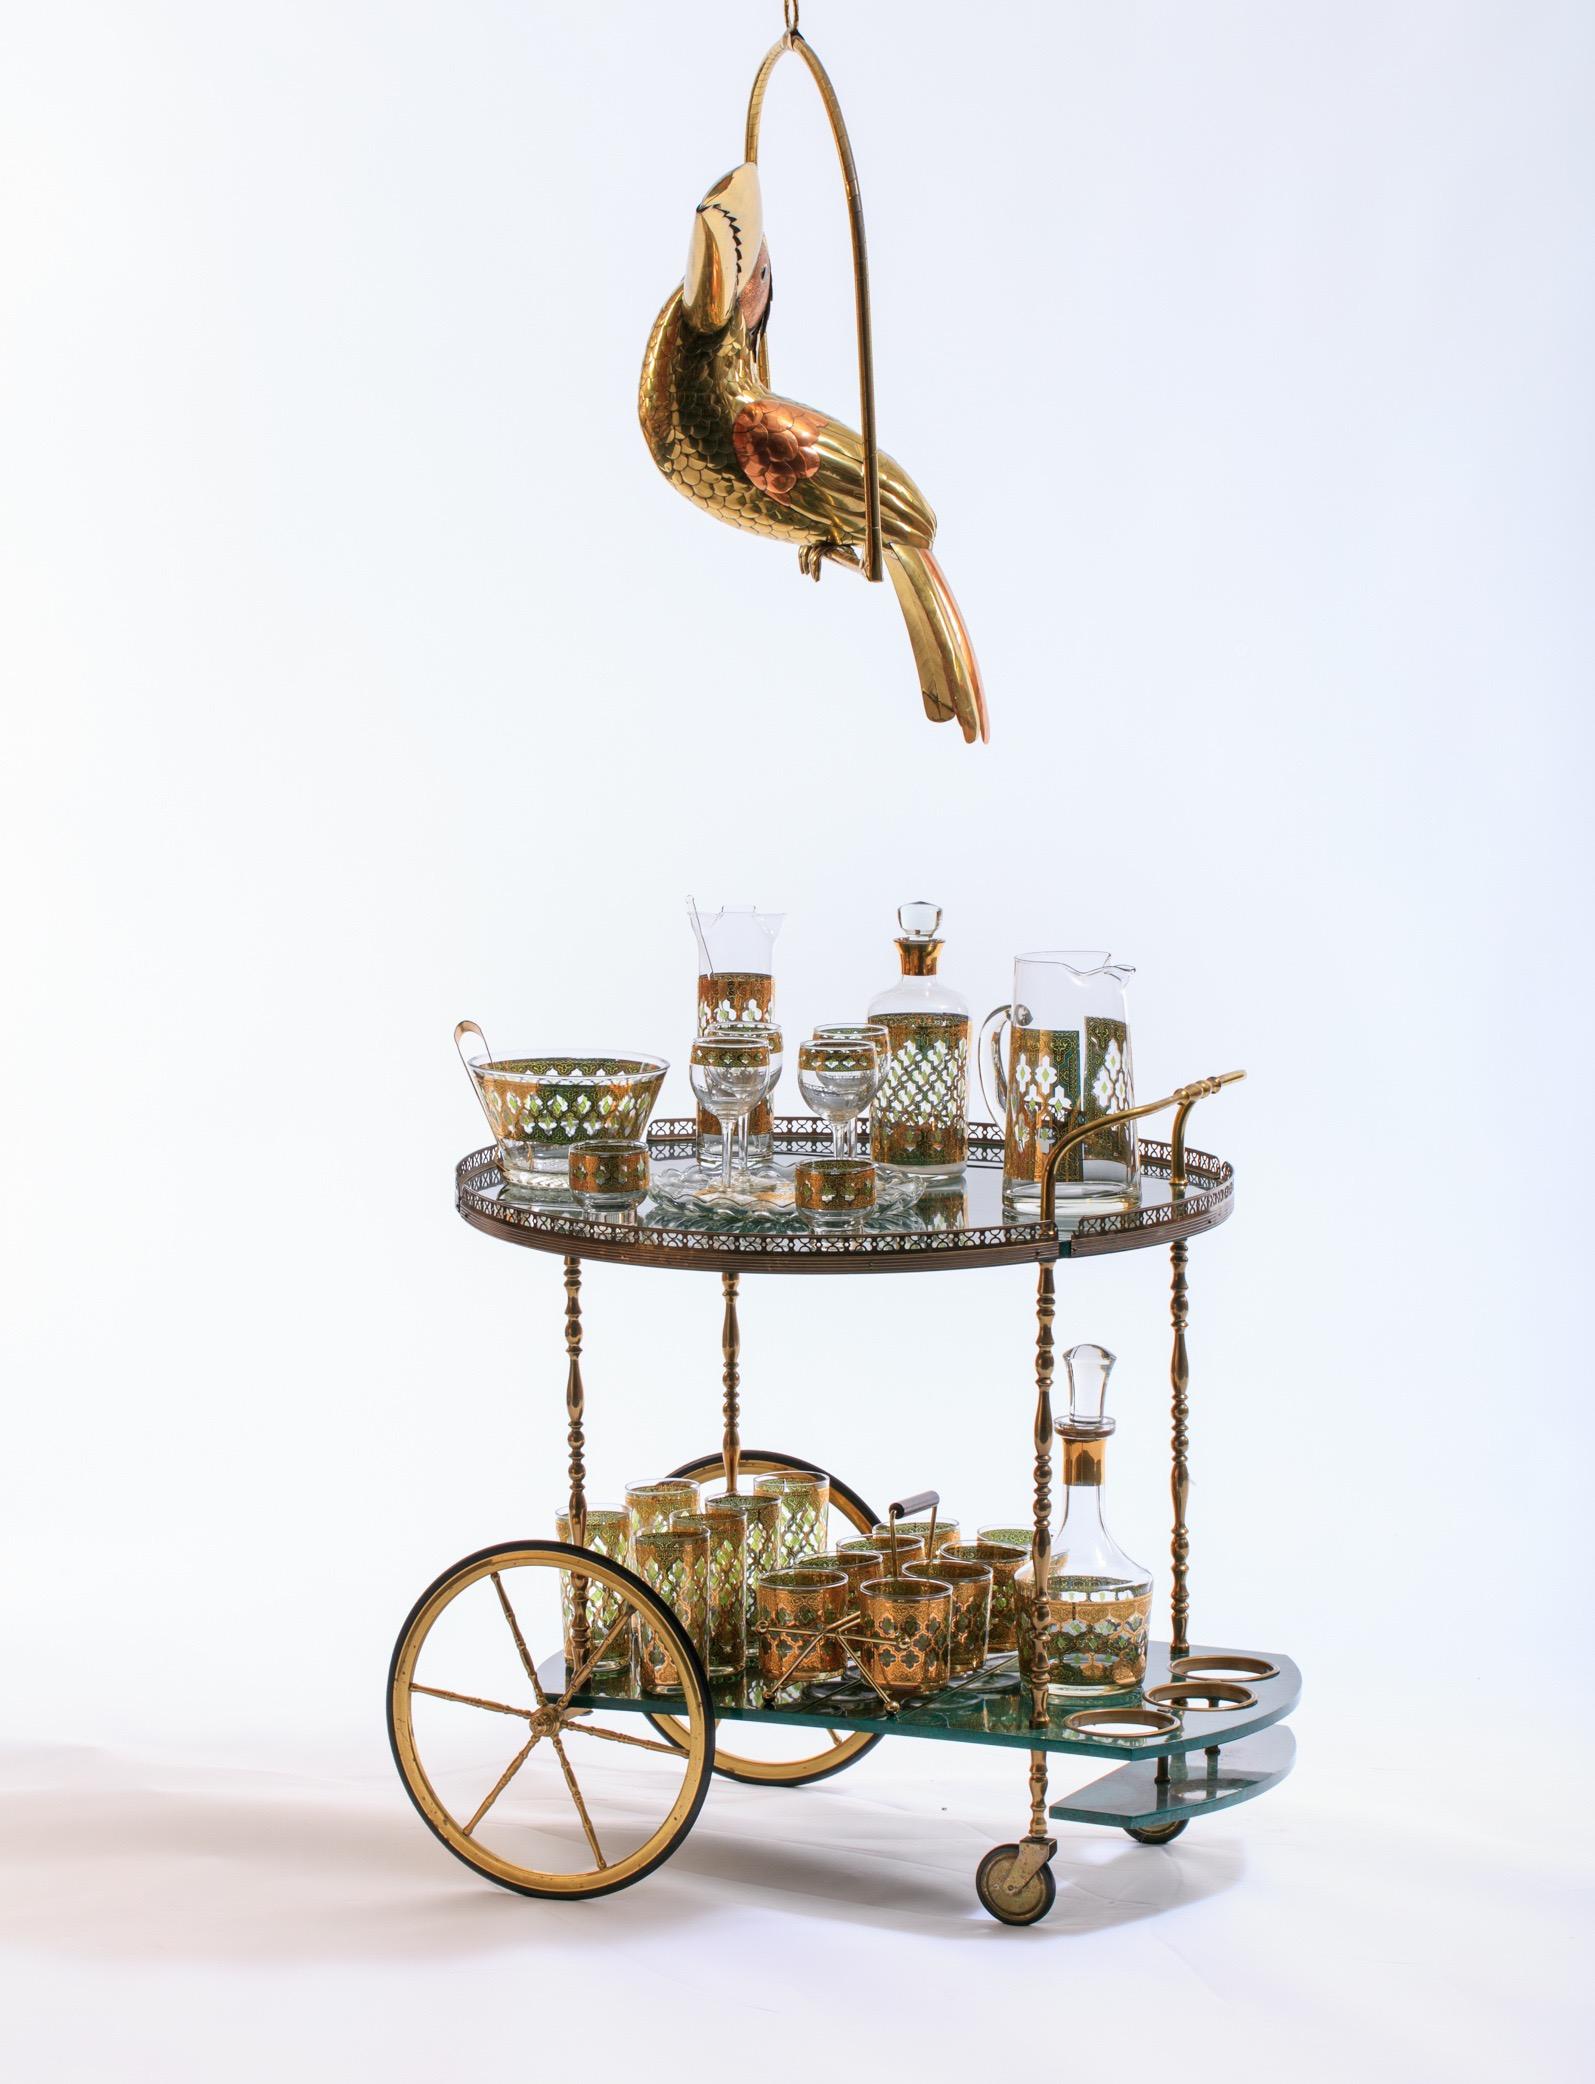 Large, life-size brass and copper Sergio Bustamante toucan on a hanging perch. Bustamante's work was most recently featured by Architectural Digest in its September 2019, where rock star and interior designer extraordinaire chose a Bustamente